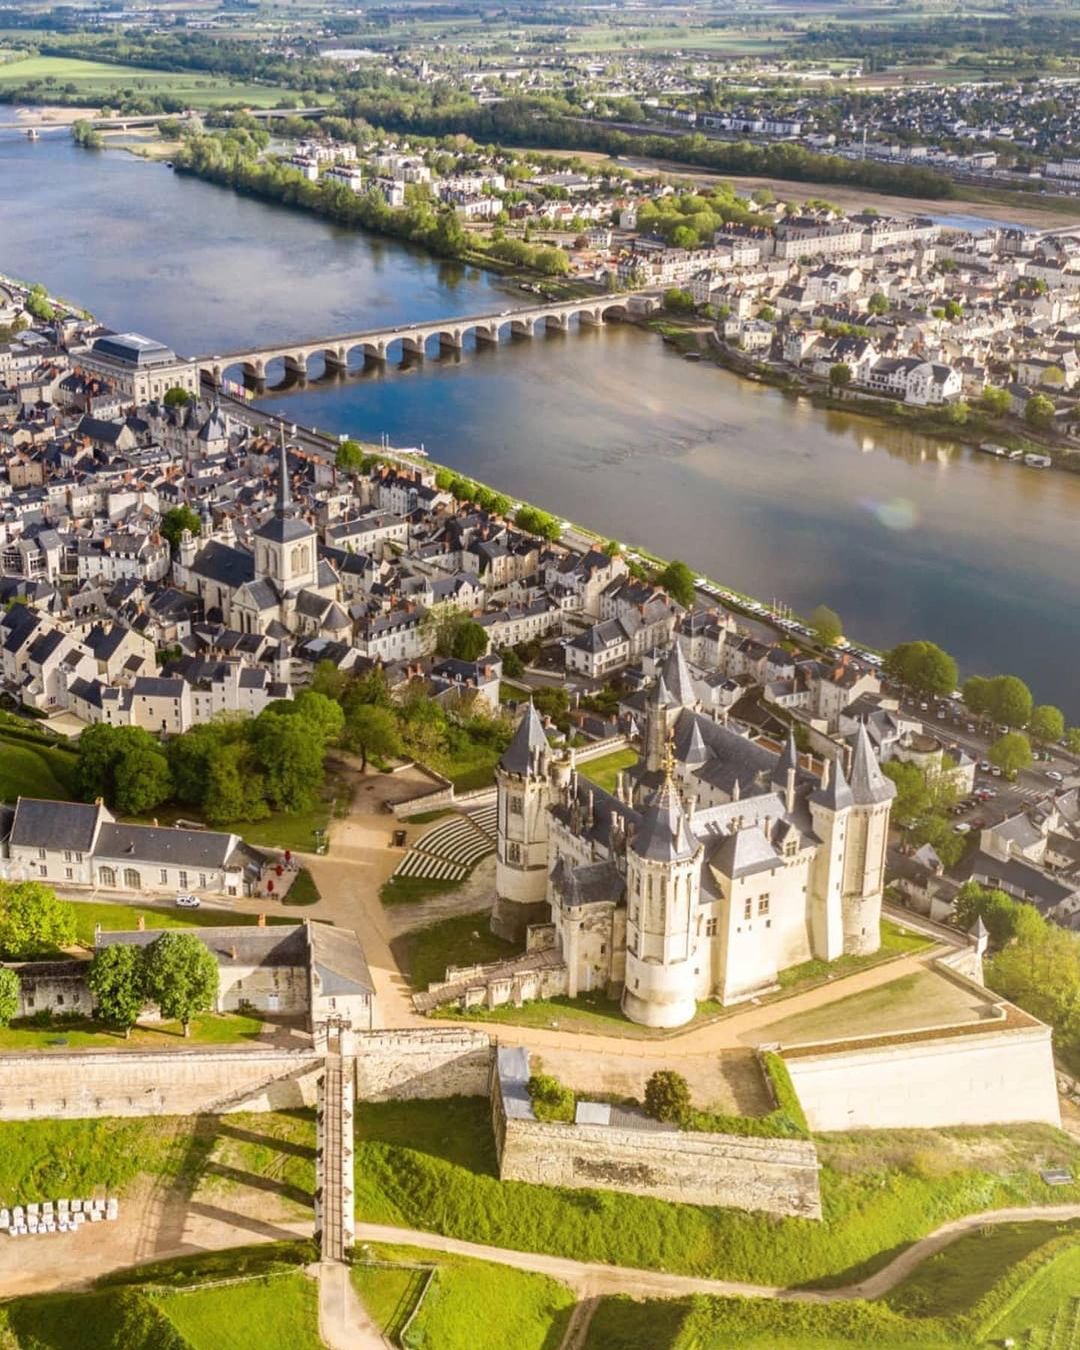 Immersion In The Loire Valley Countryside | 3 days / 2 nights